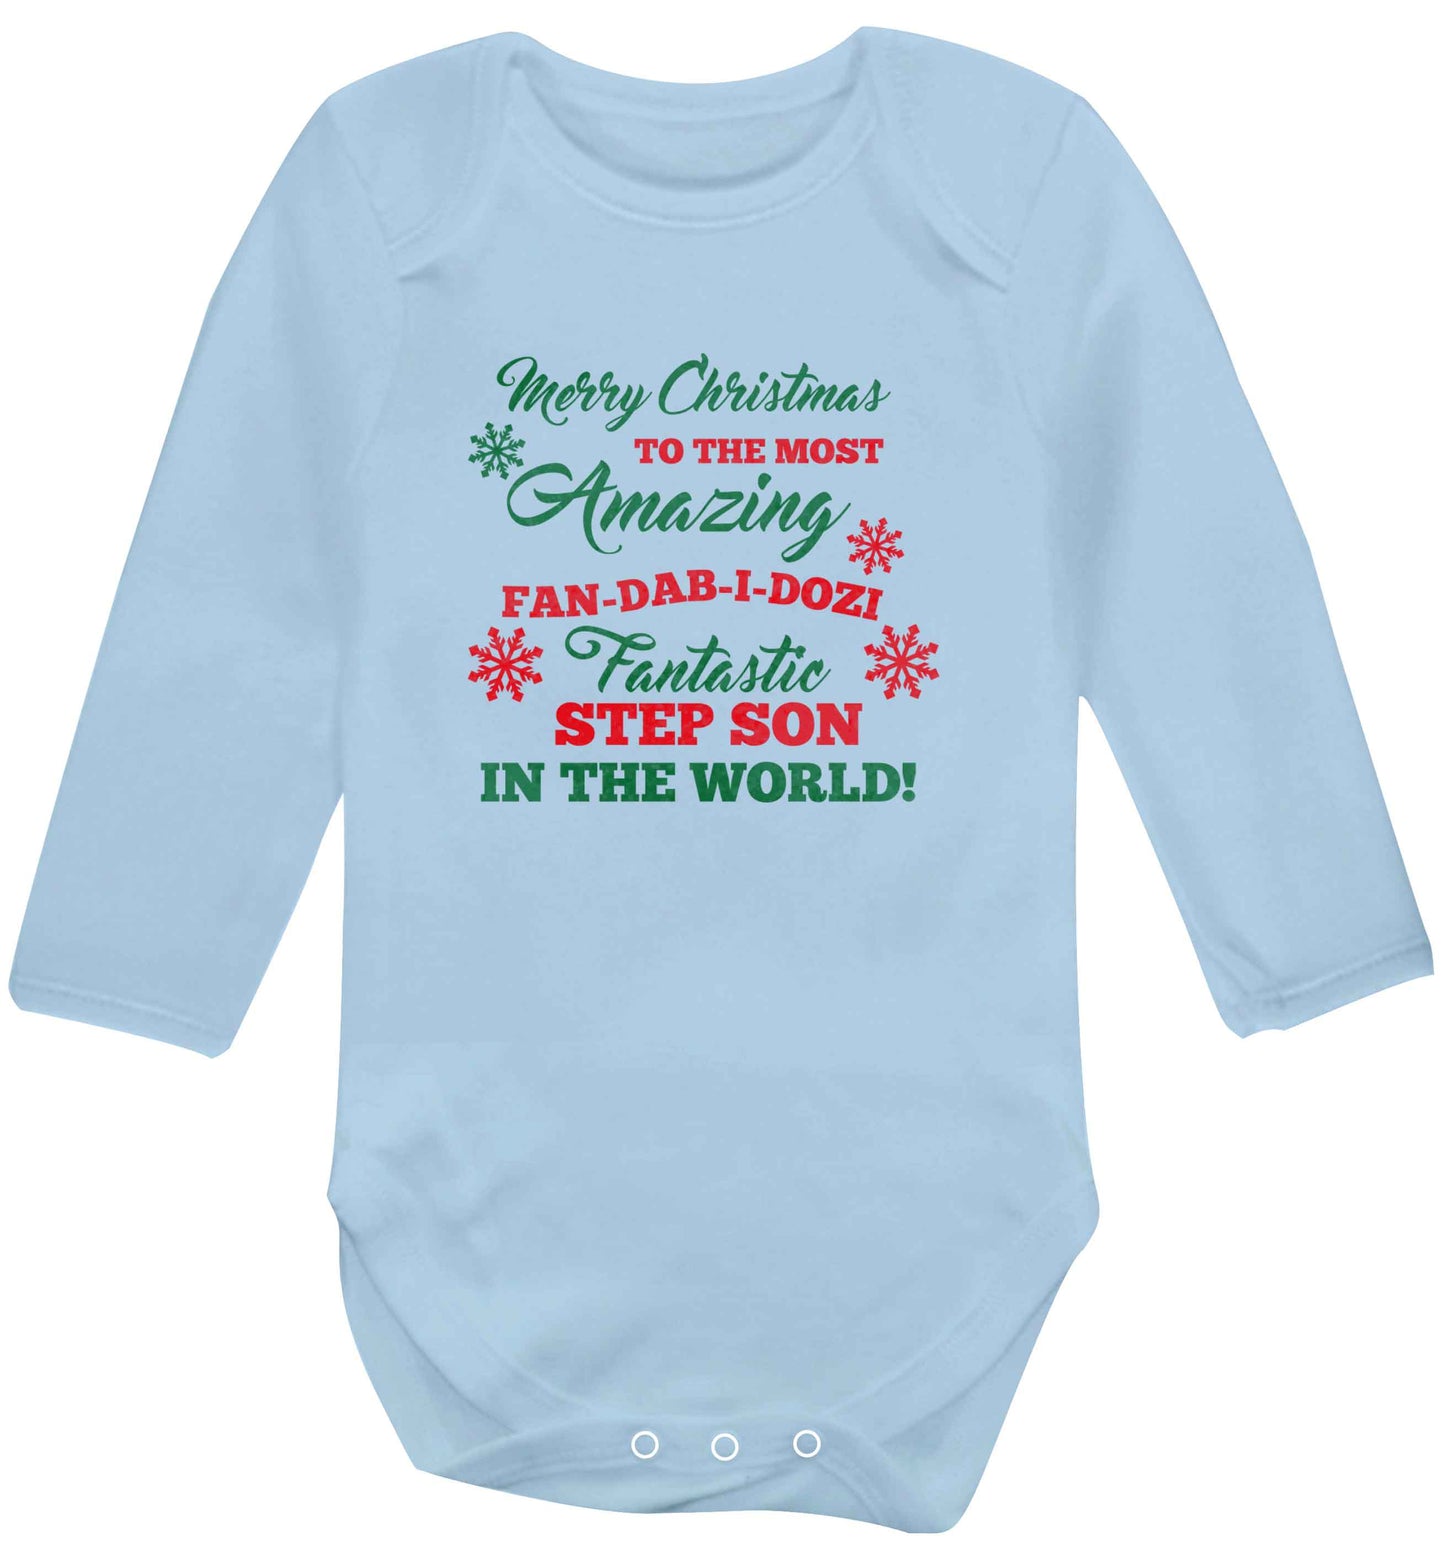 Merry Christmas to the most amazing fan-dab-i-dozi fantasic Step Son in the world baby vest long sleeved pale blue 6-12 months